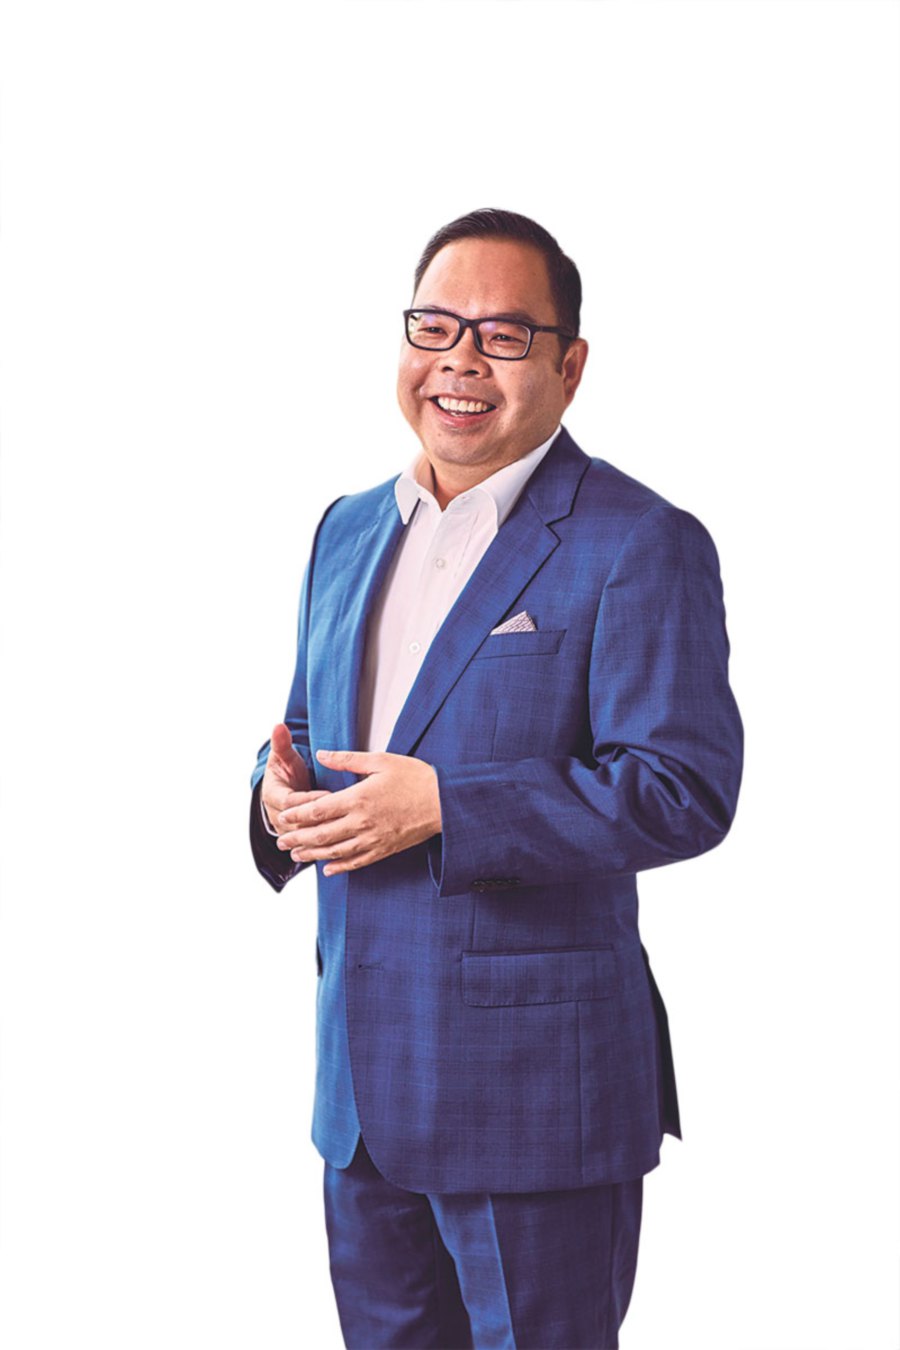 SkyWorld founder and group managing director Datuk Ng Thien Phing says the company undertakes the affordable housing project as part of its corporate social responsibility initiatives.